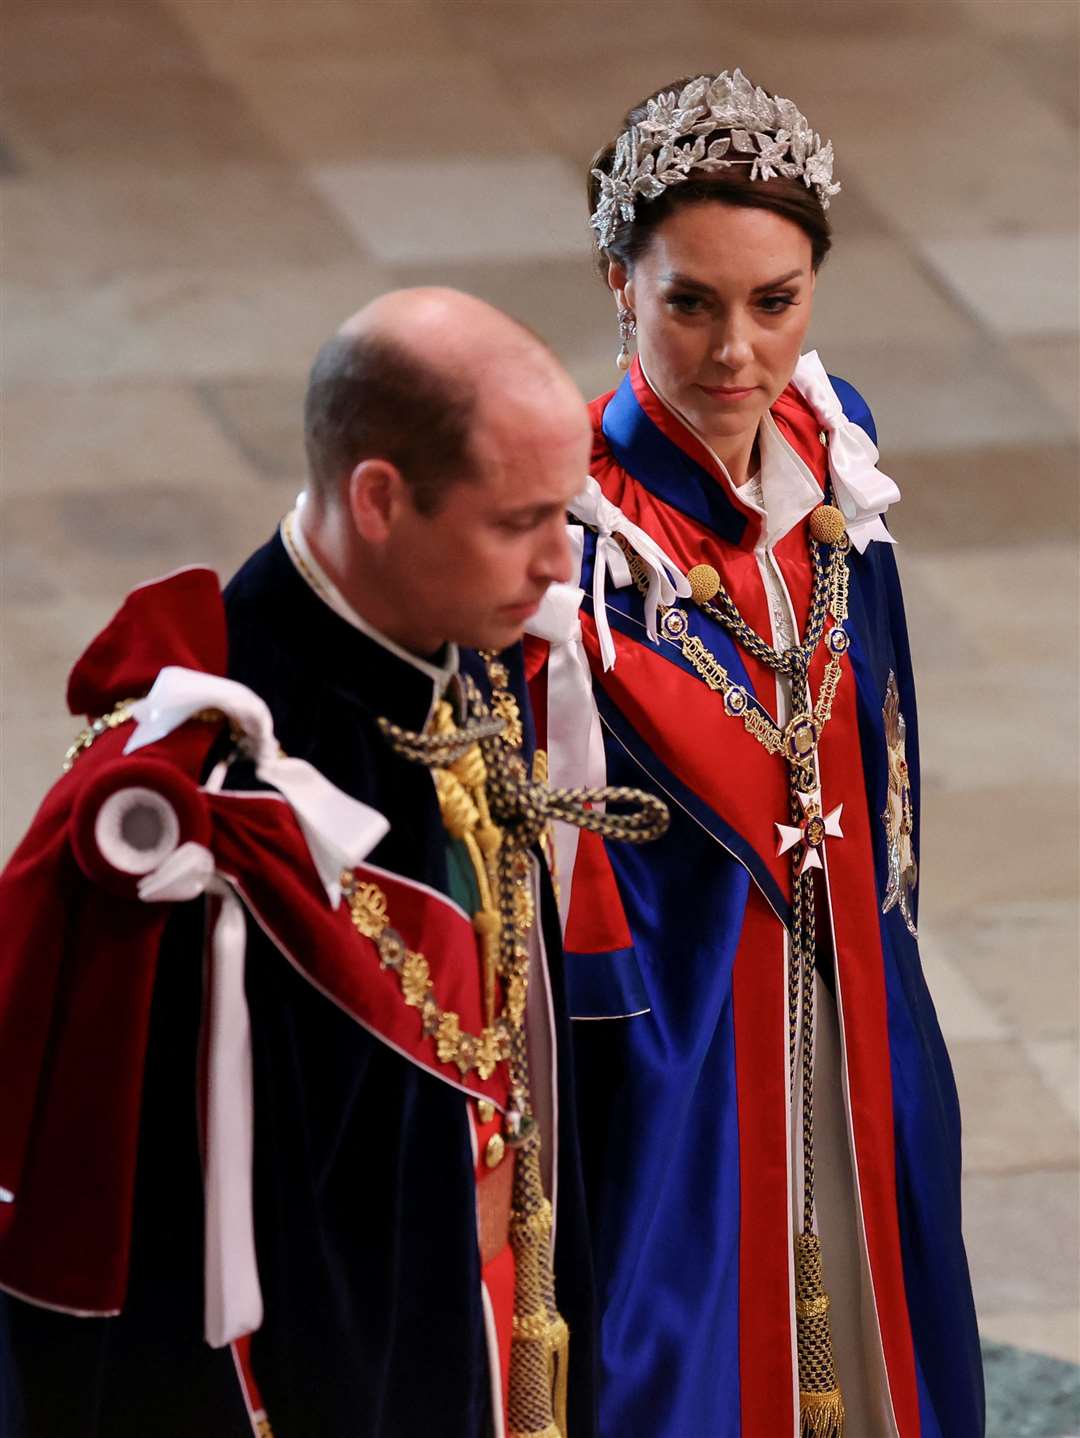 The Prince wore his Order of the Garter cloak (PA)